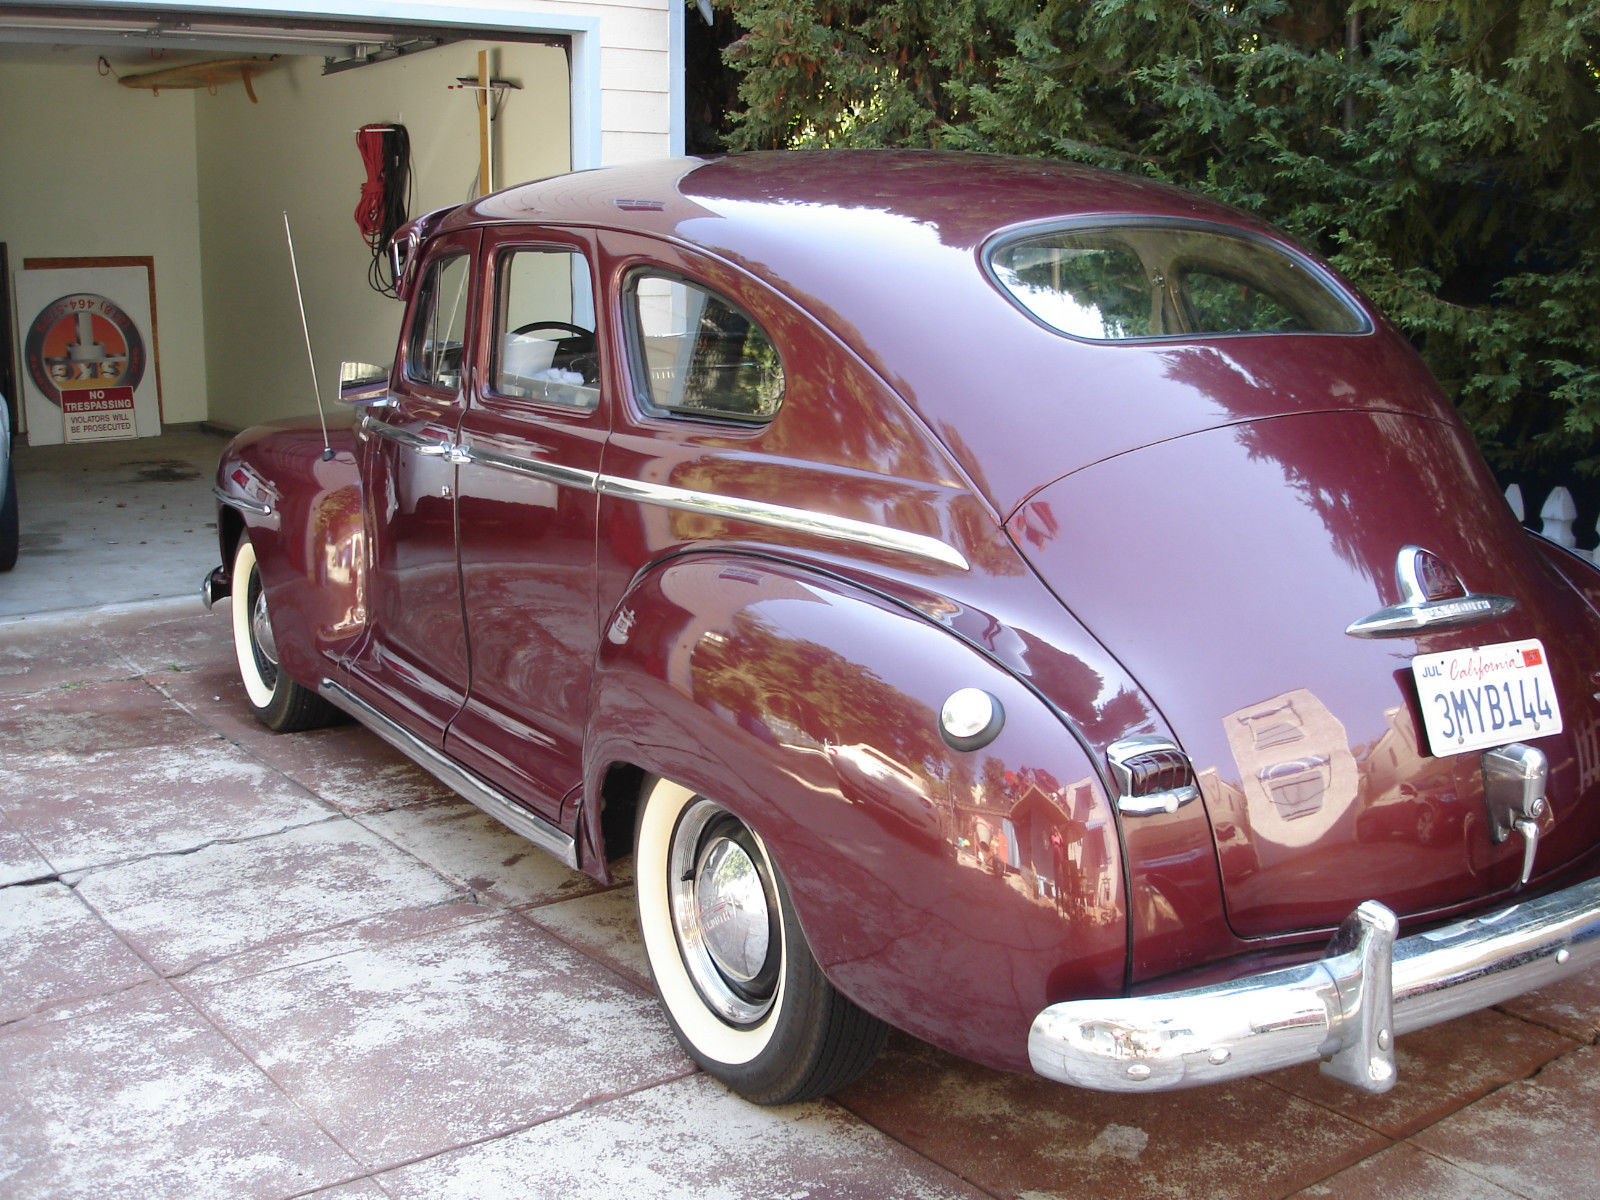 The car was used in the movie "Jersey Boys,"show stopper. 1948 Plymouth